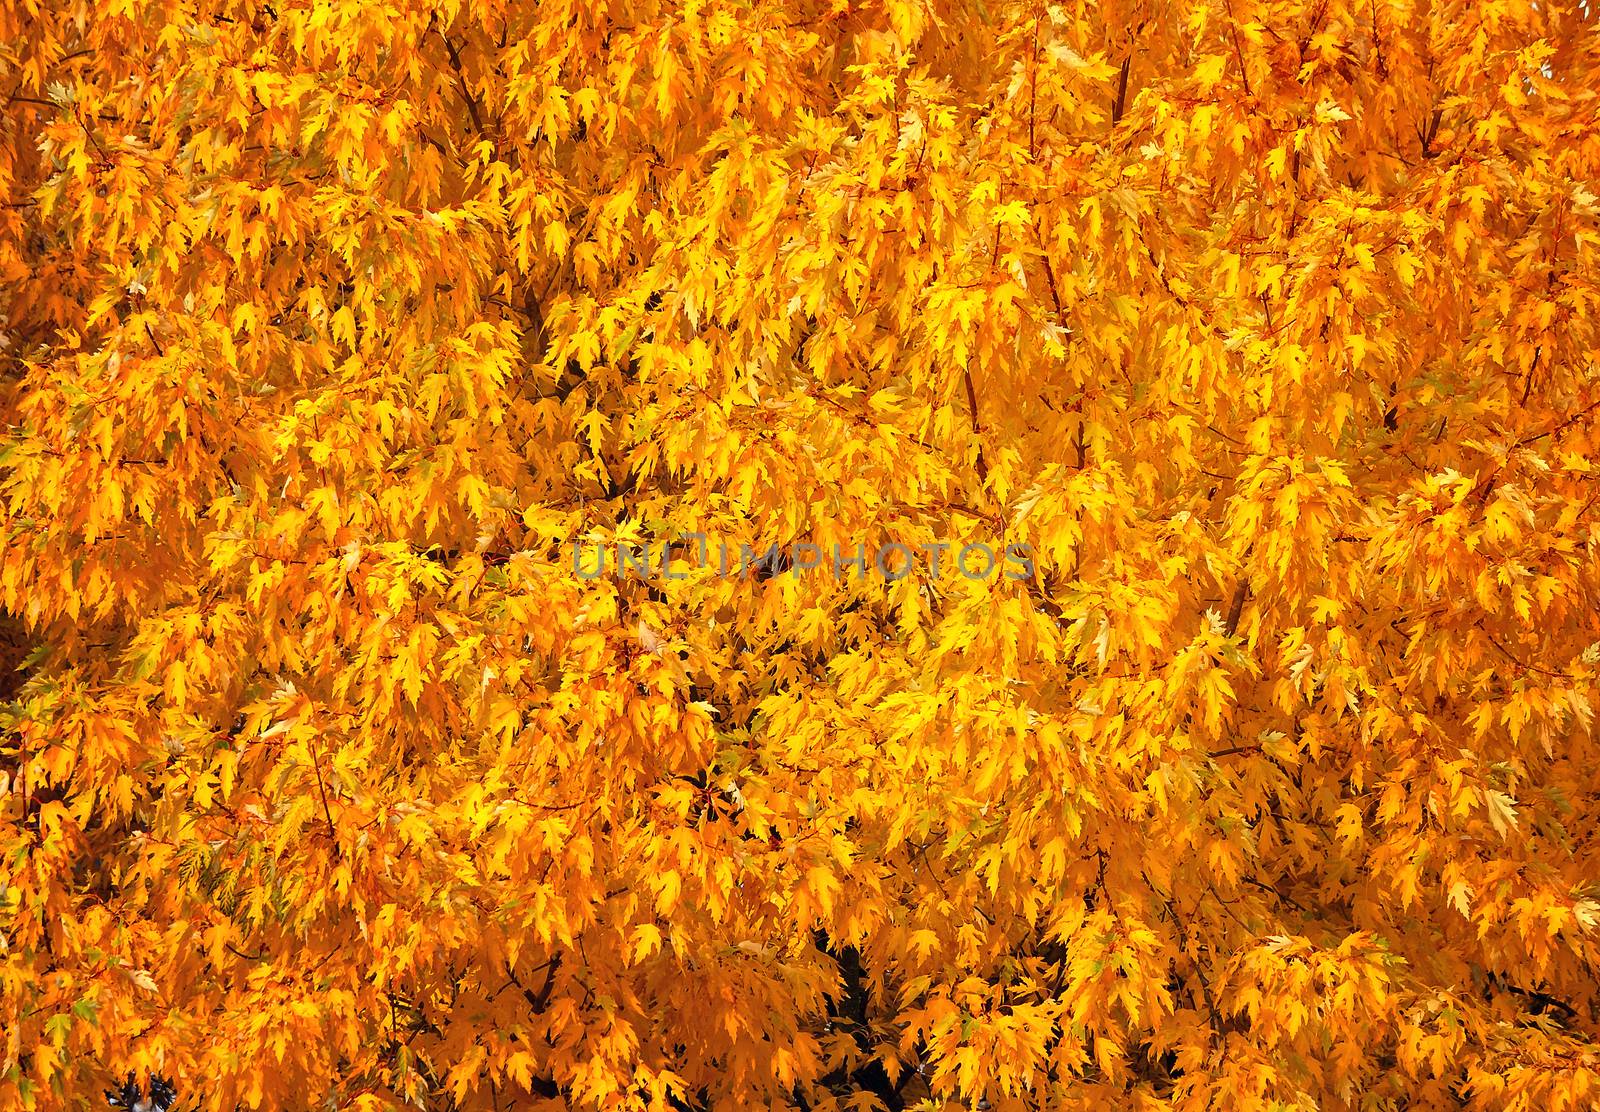 Fragment of the thick crown of a tree in autumn with a lot of leaves of yellow color (background image).